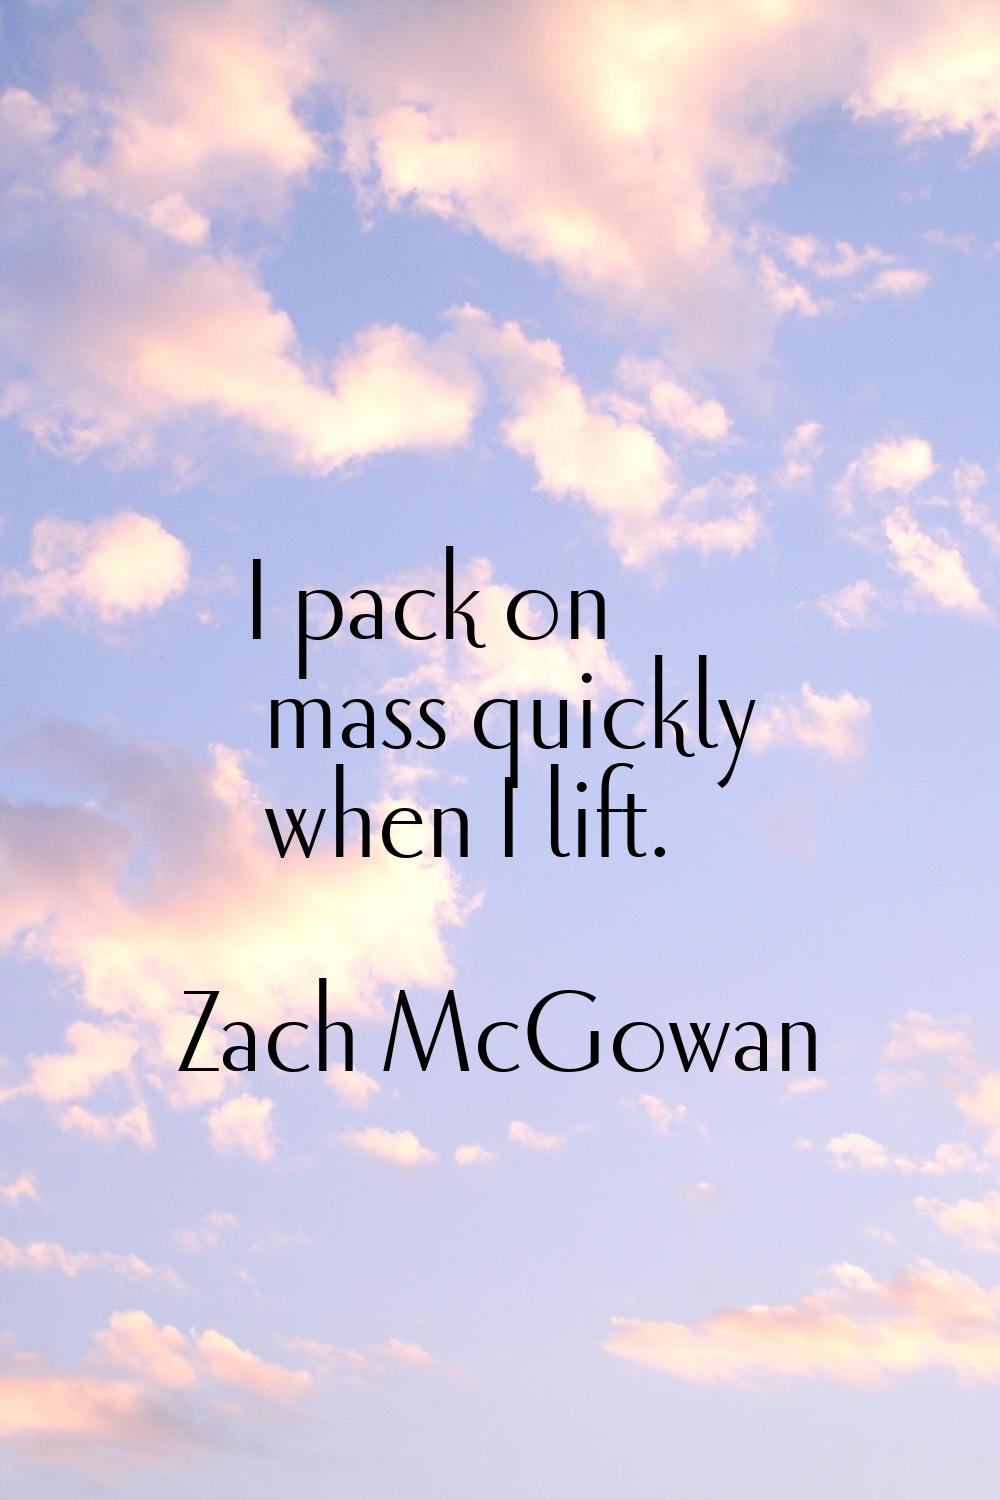 I pack on mass quickly when I lift.